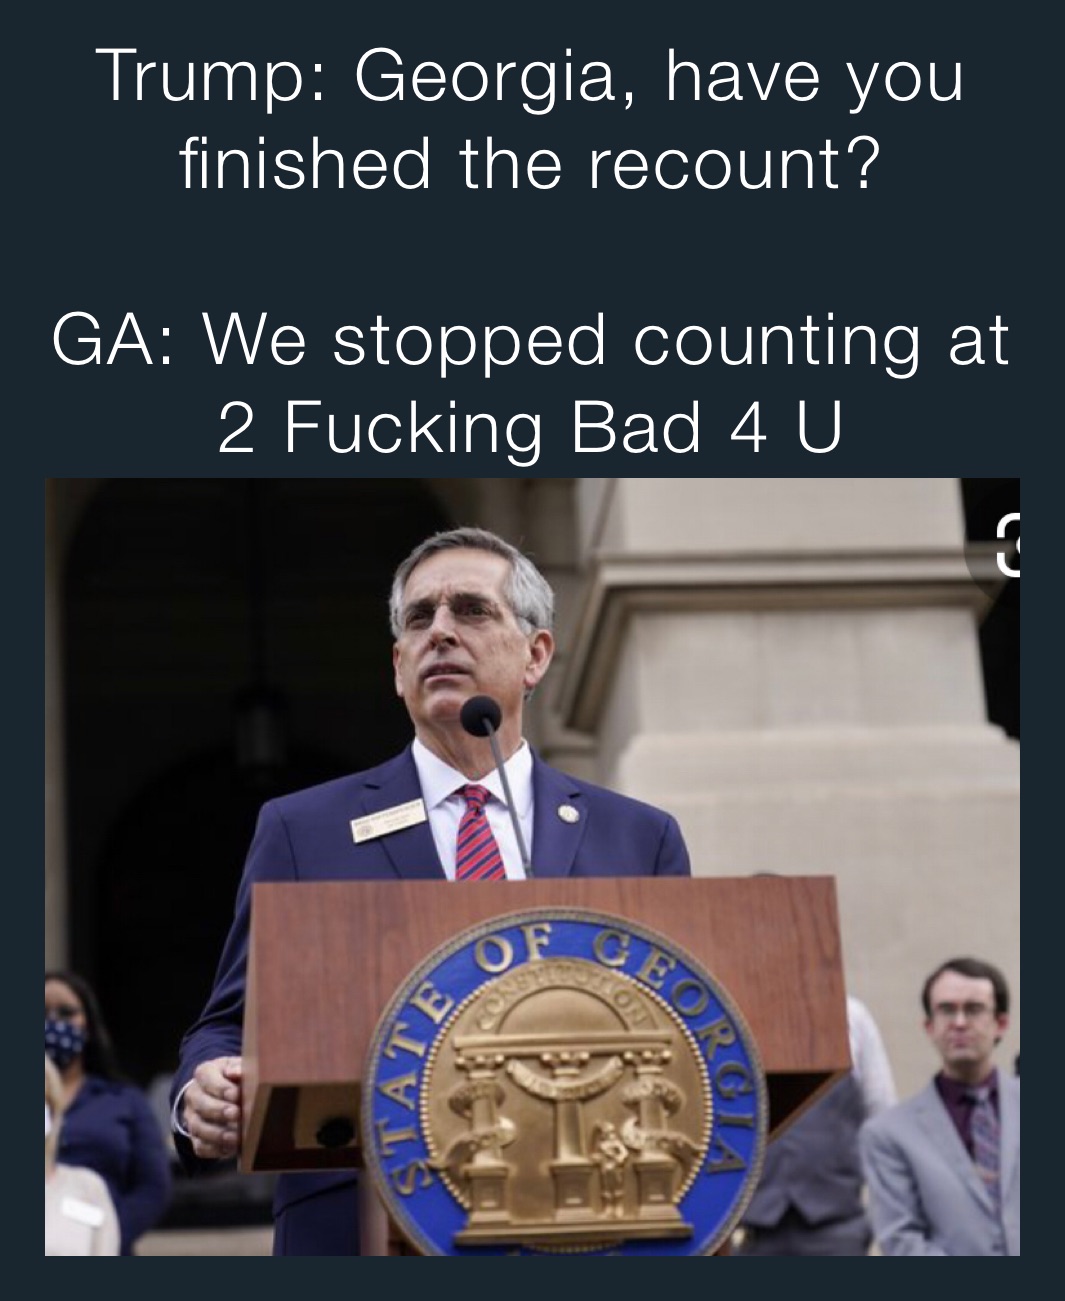 Trump: Georgia, have you finished the recount?

GA: We stopped counting at 2 Fucking Bad 4 U